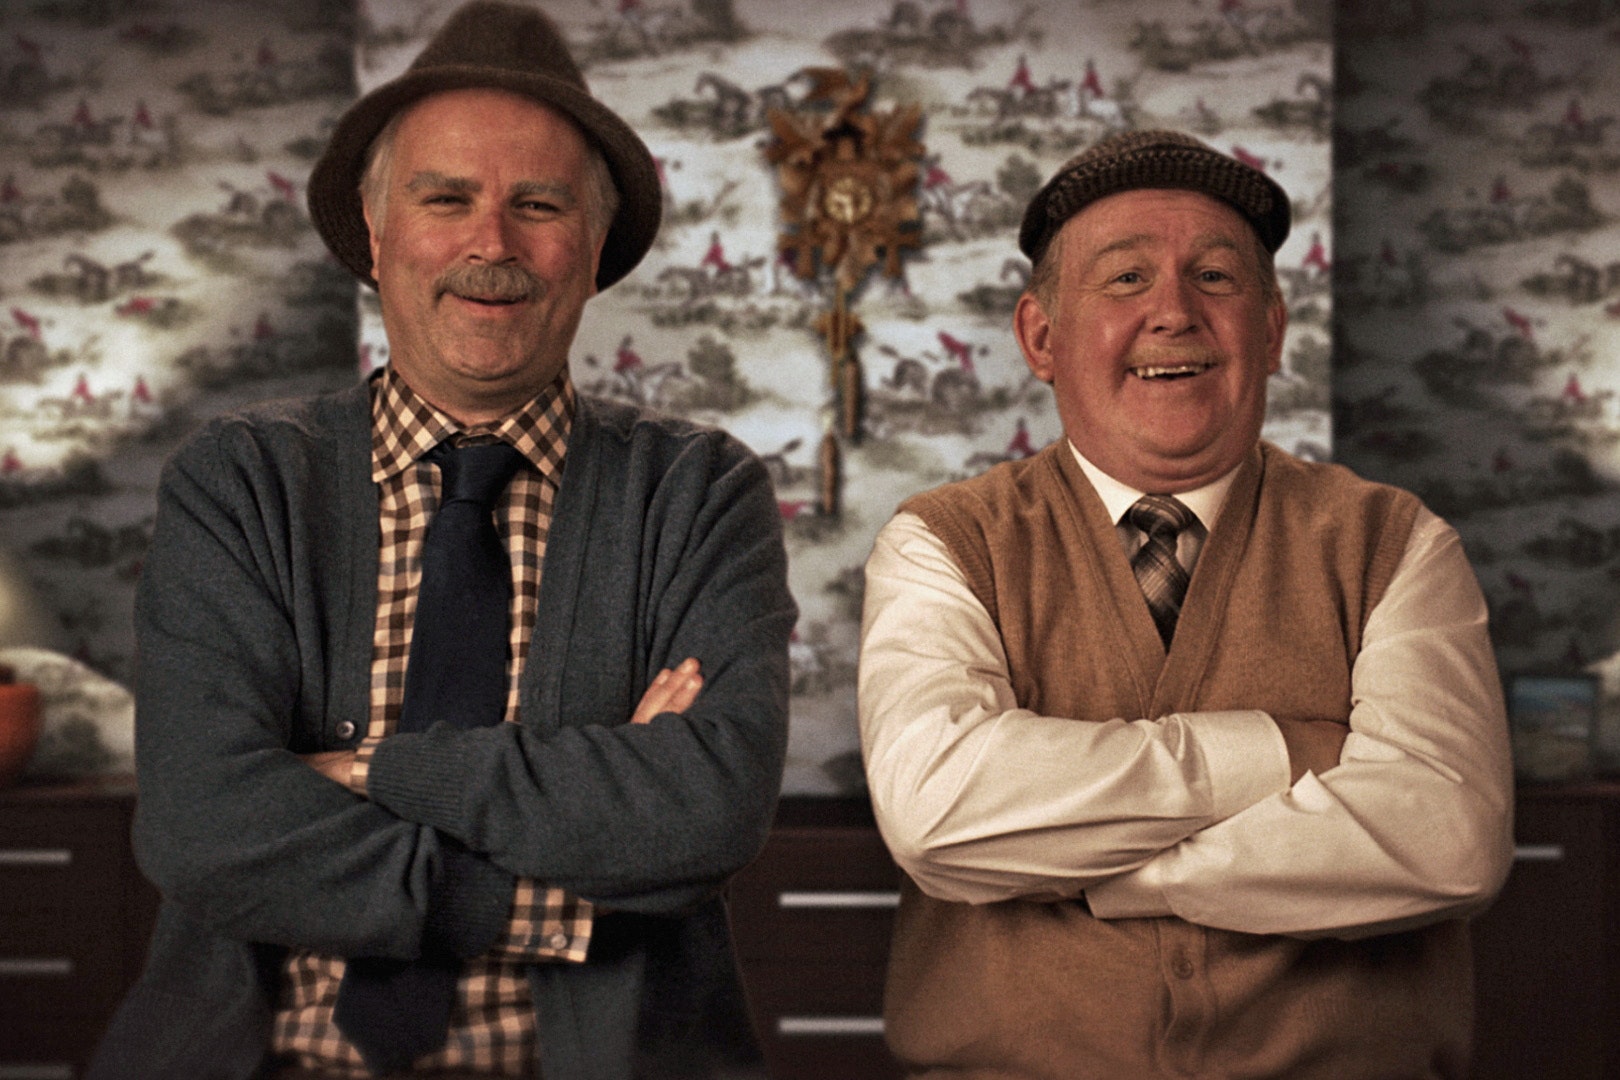 Still Game creators say series is ‘aspirational’ about old age